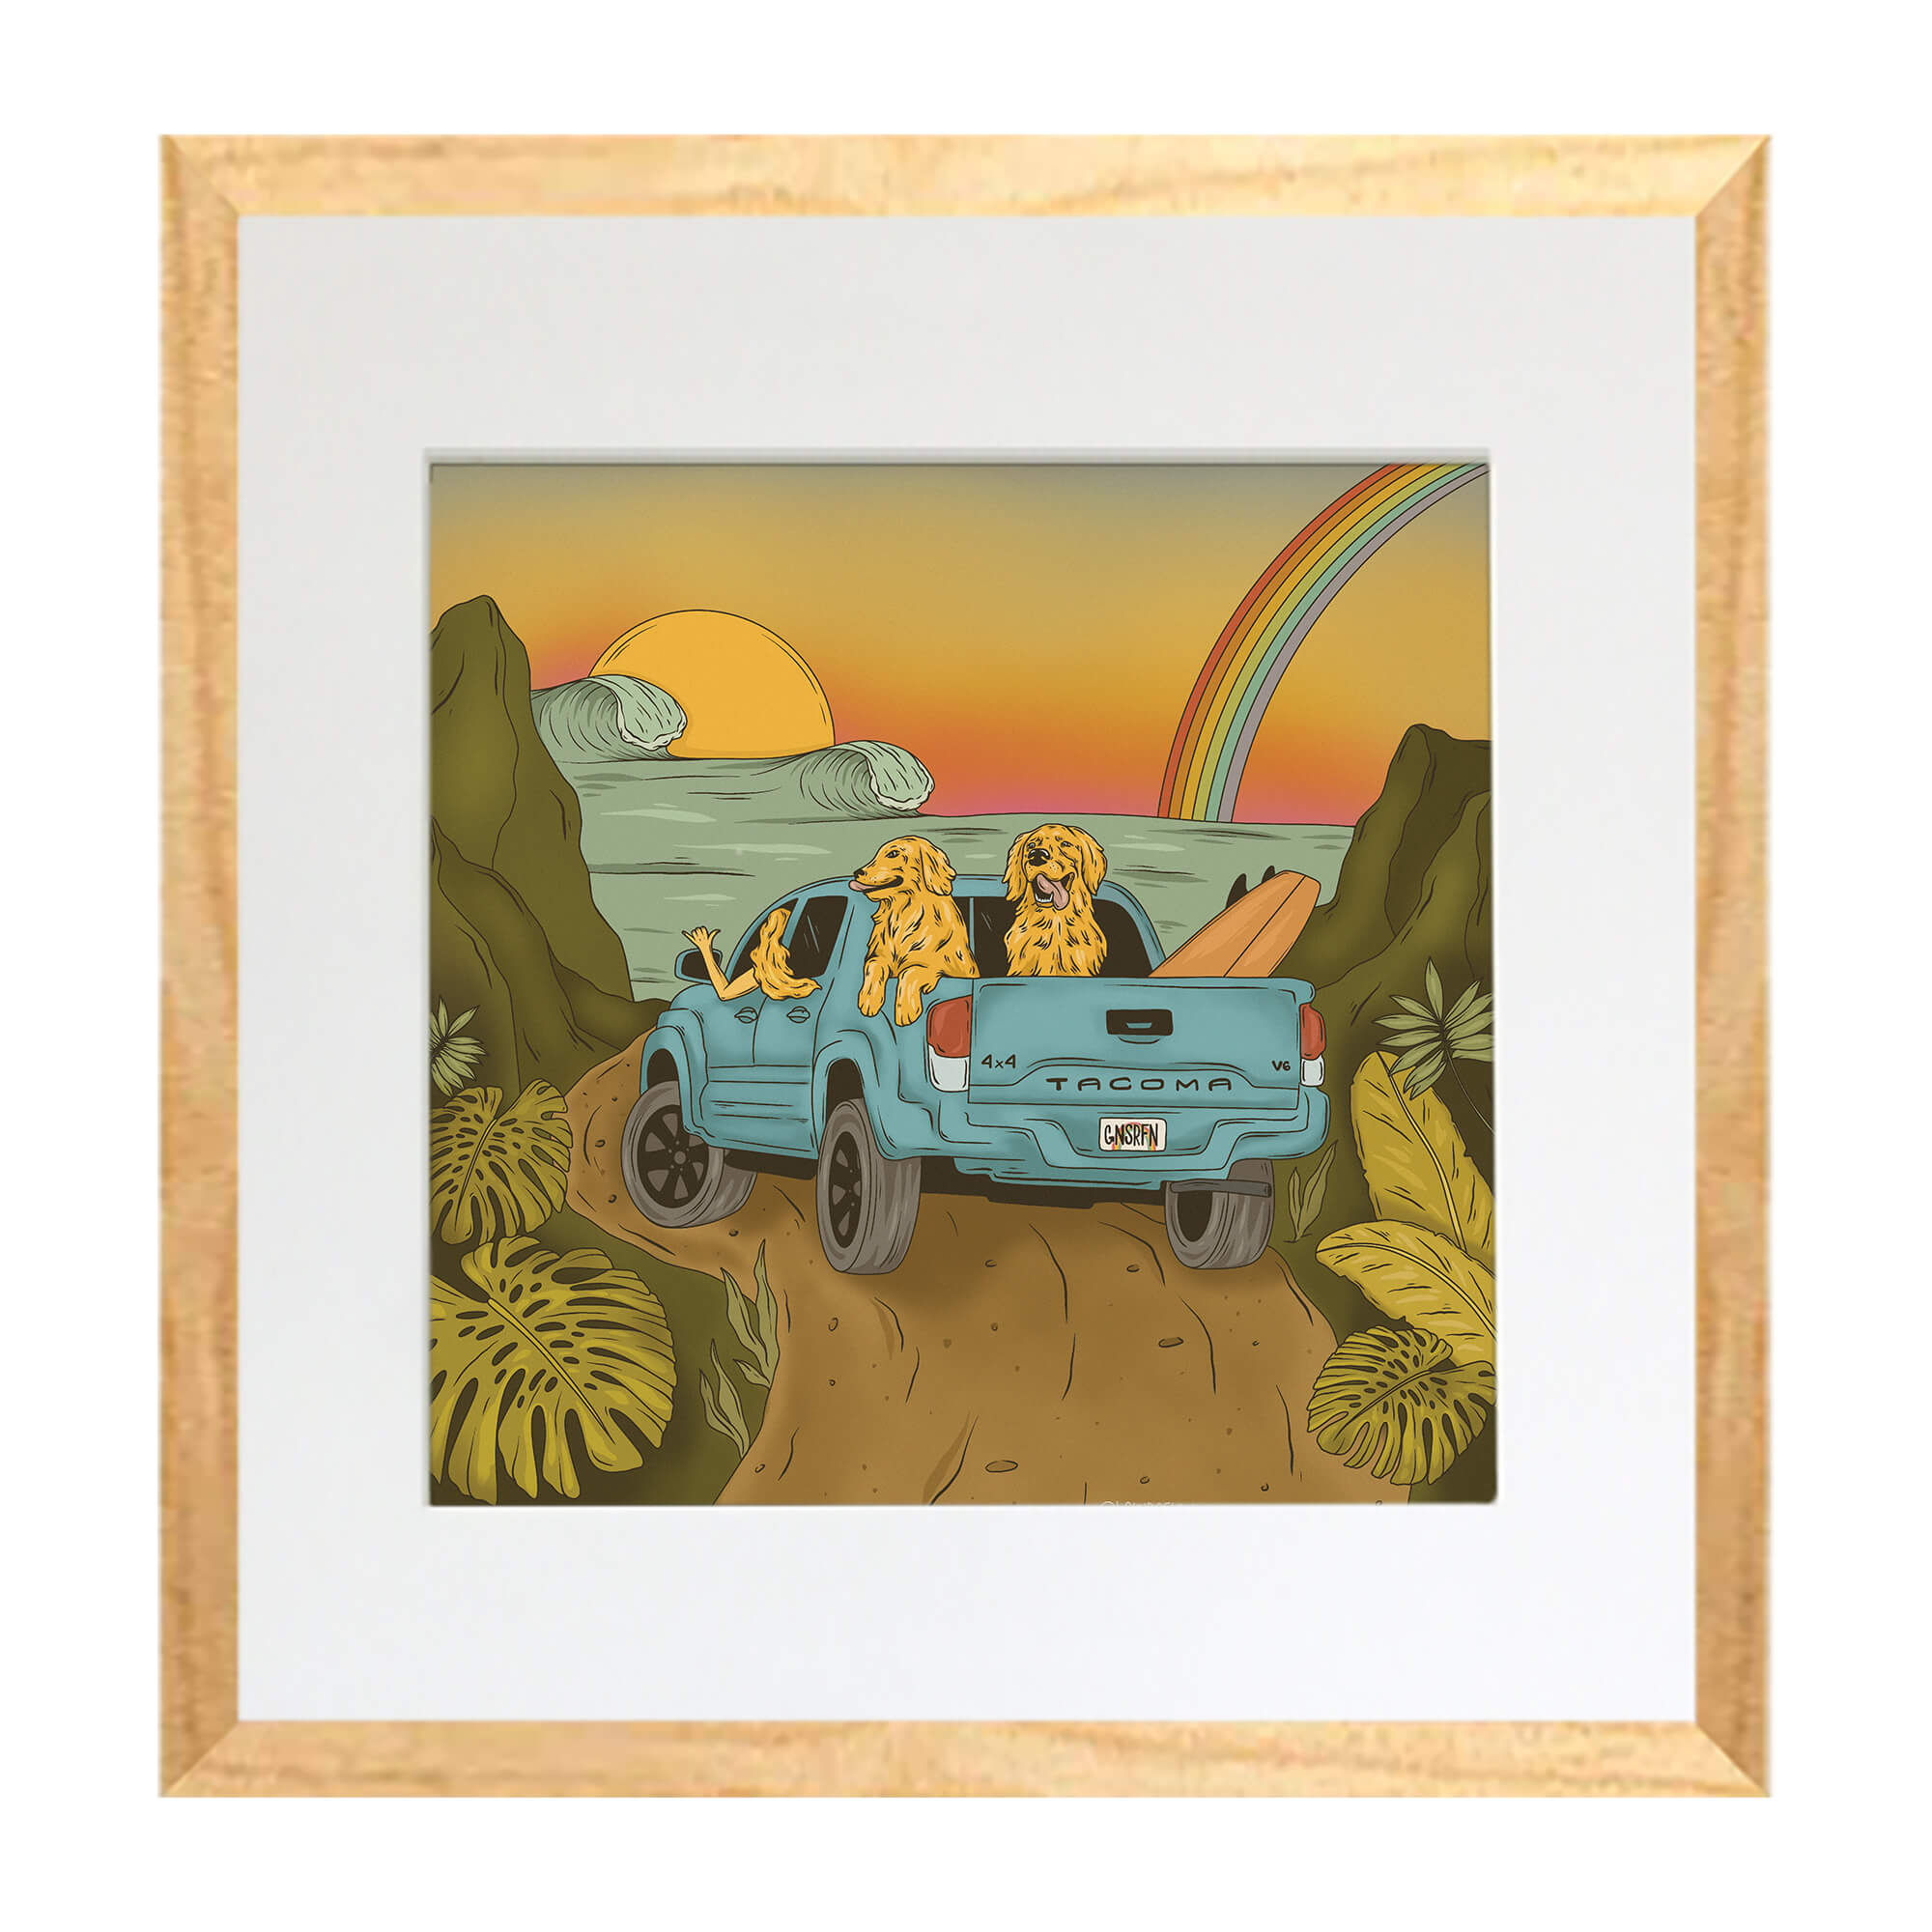 Matted art print of a woman driving towards a beautiful seascape with a rainbow and sunset by Hawaii artist Laihha Organna